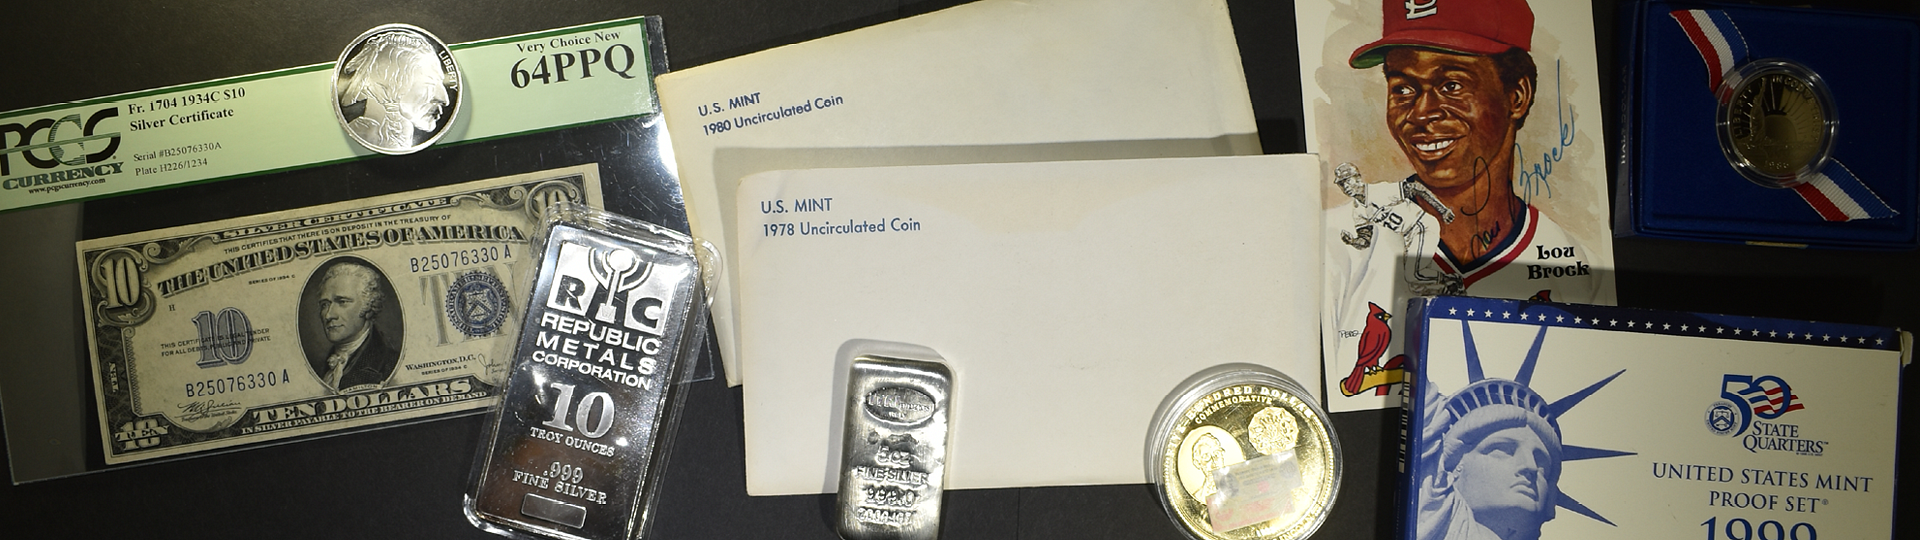 June 20th Silver City Rare Coins & Currency by Silver City Auctions